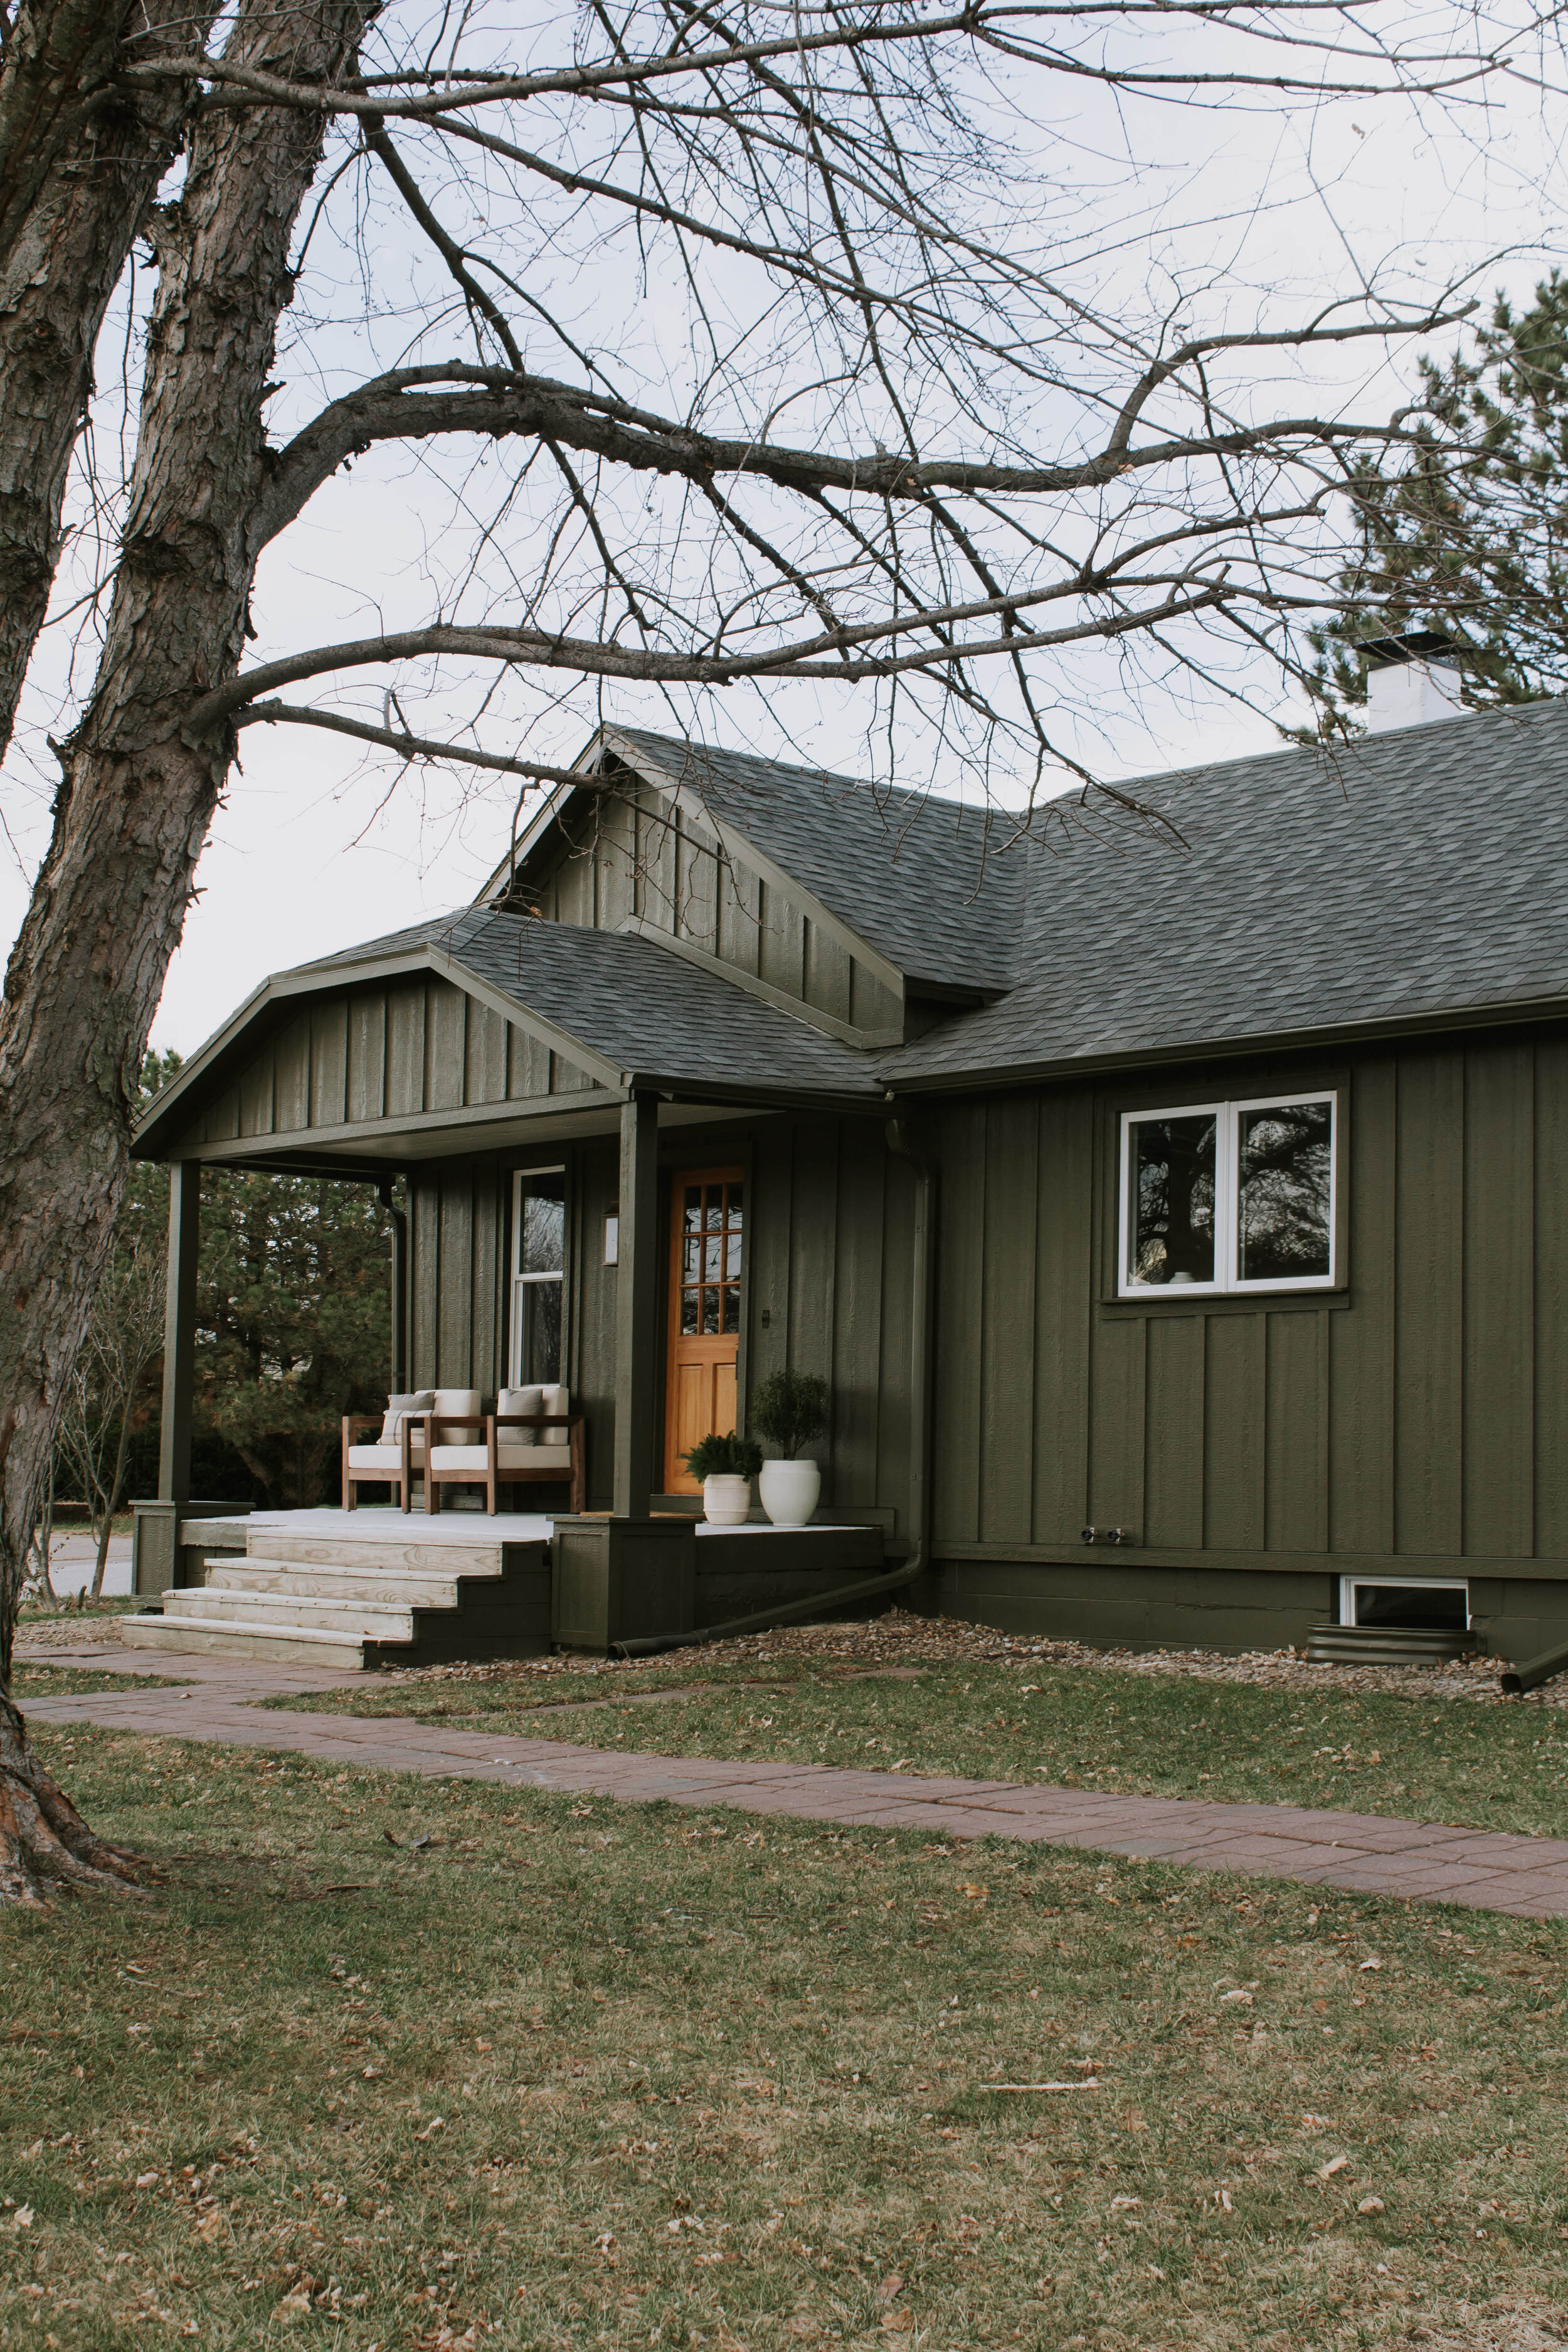 Our Home Exterior Reveal (Phase 1) | Exterior makeover and renovation. Home exterior before and after transformation. New board and batten siding and a cabin design style. Exterior paint color is Muddled Basil by Sherwin Williams | Nadine Stay